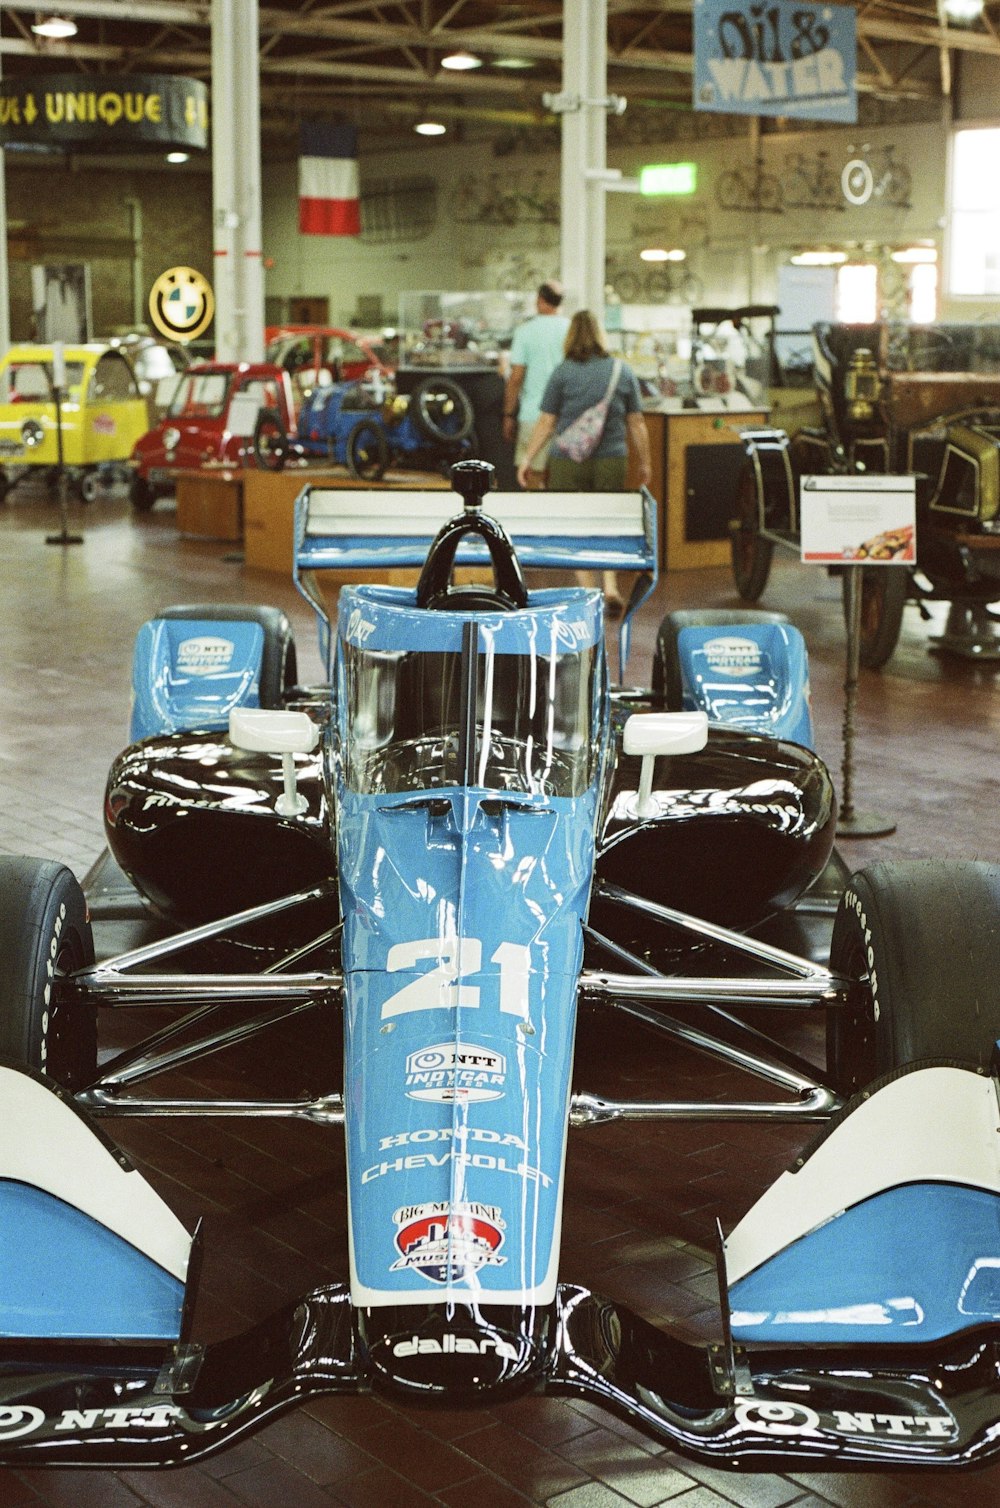 a blue race car is on display in a showroom